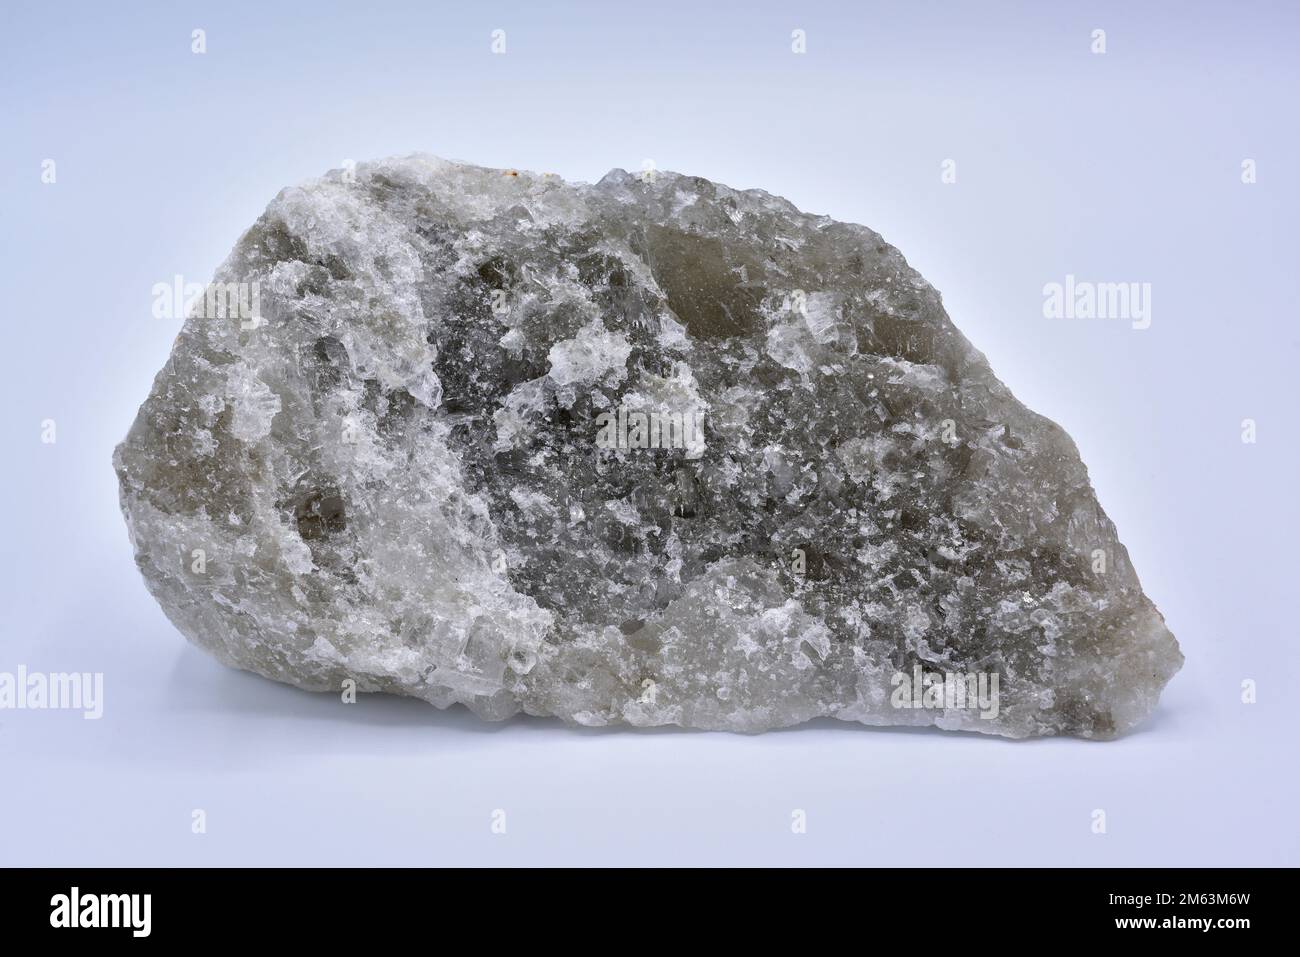 Halite or rock salt is a sodium chloride mineral. This sample comes from Cardona, Barcelona, Catalonia, Spain. Stock Photo